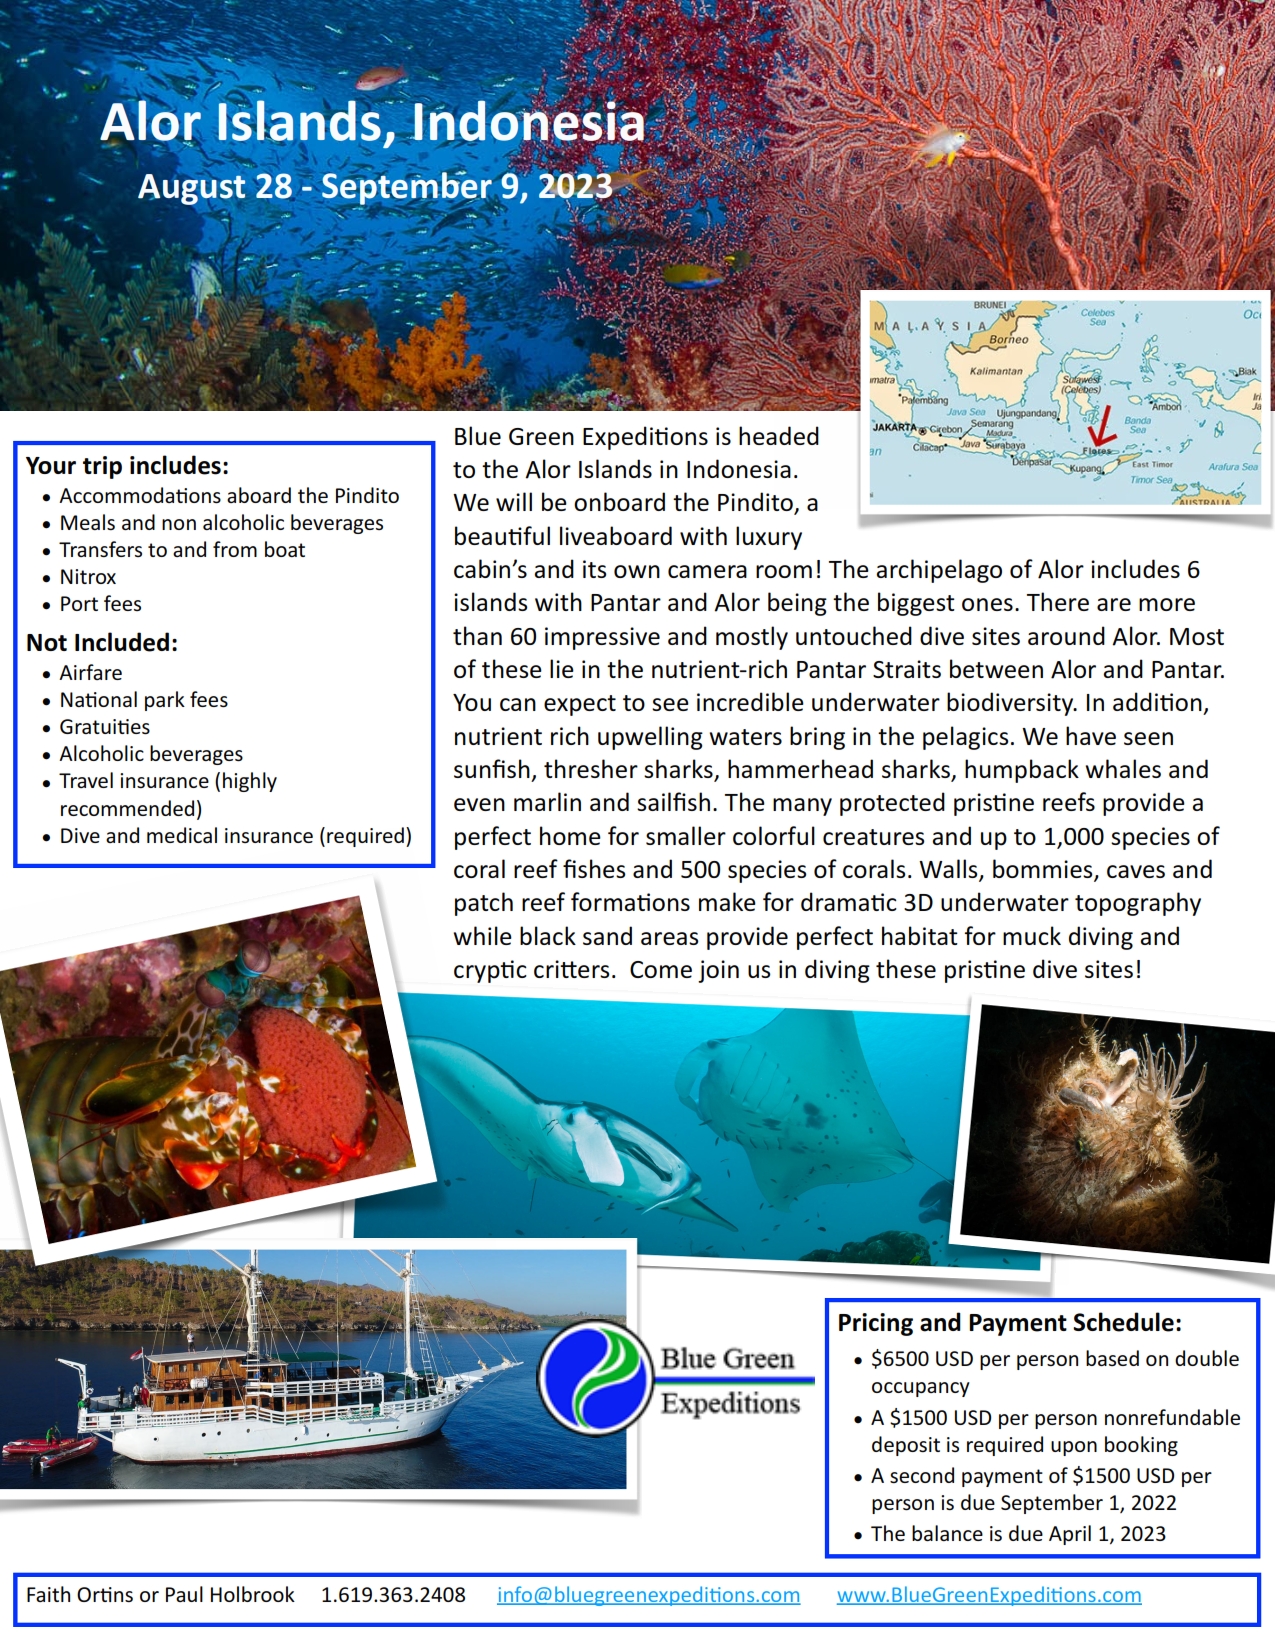 Alor Islands, August 28 - September 9, 2023, expedition description and pricing. PDF flyer contains the same information.